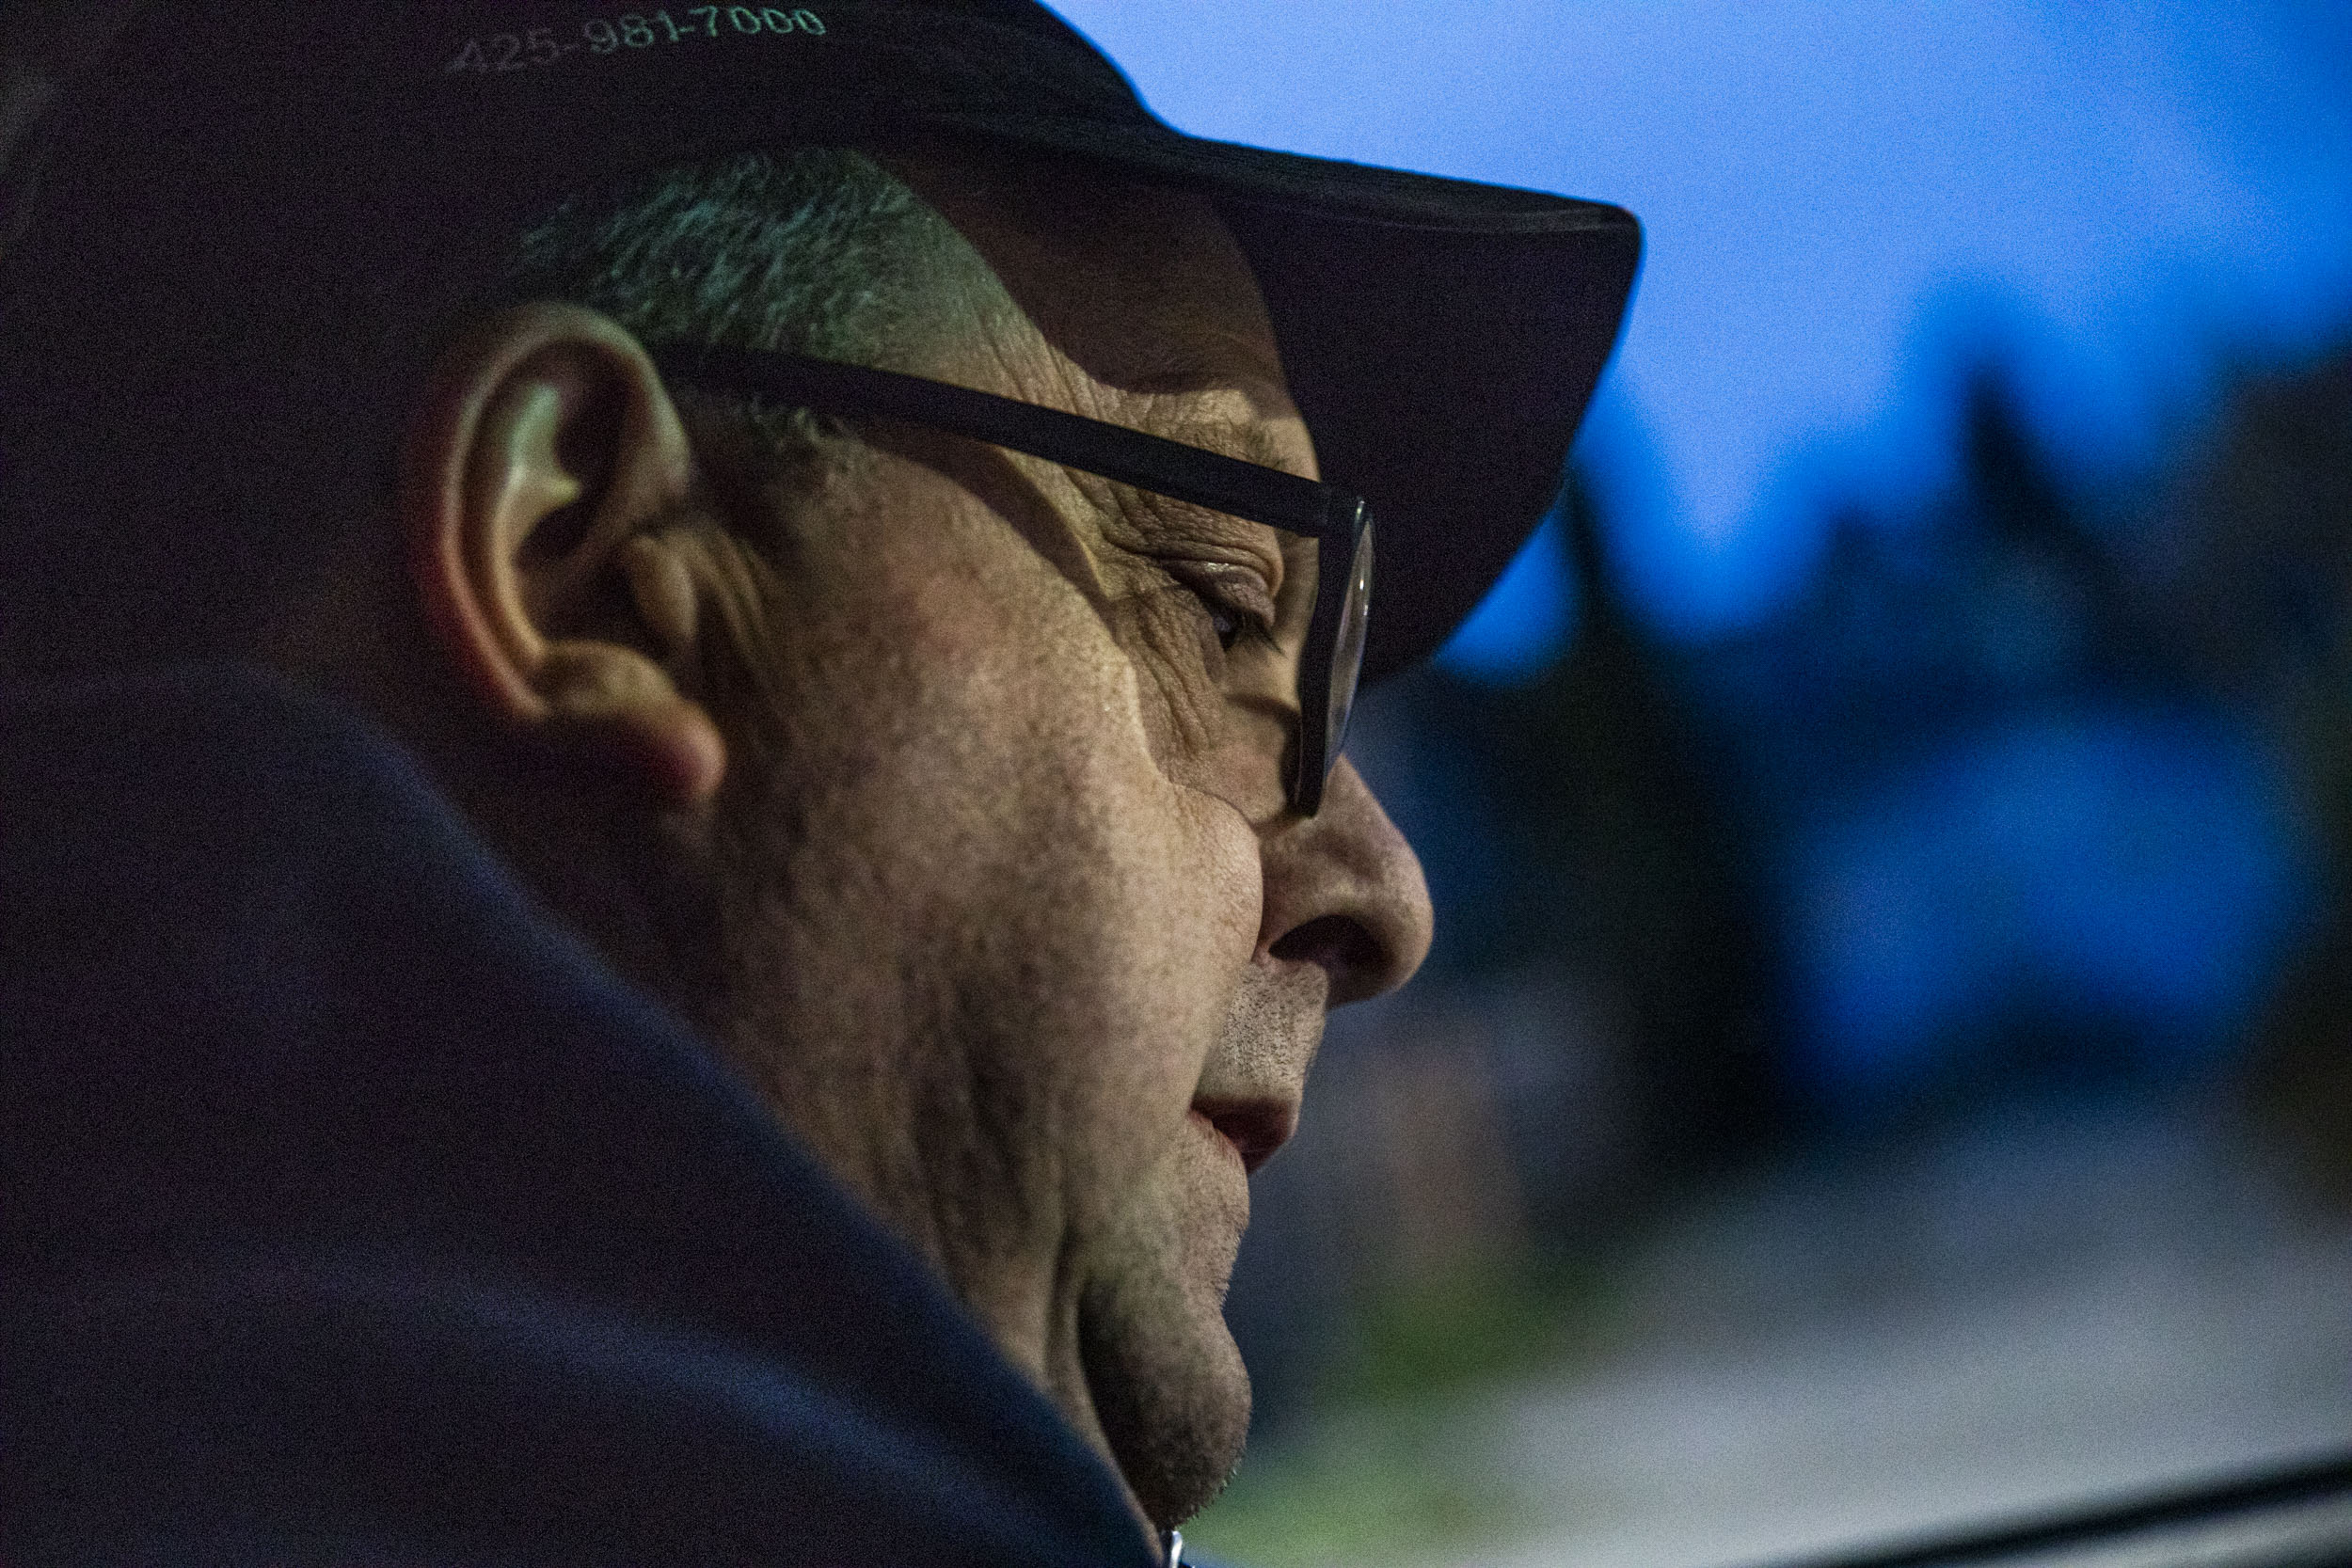 Doug Latta, 58, checks his route list in his car during his final delivery route for the Seattle Weekly on Feb. 27, 2019. (Photo by Dorothy Edwards/Crosscut)